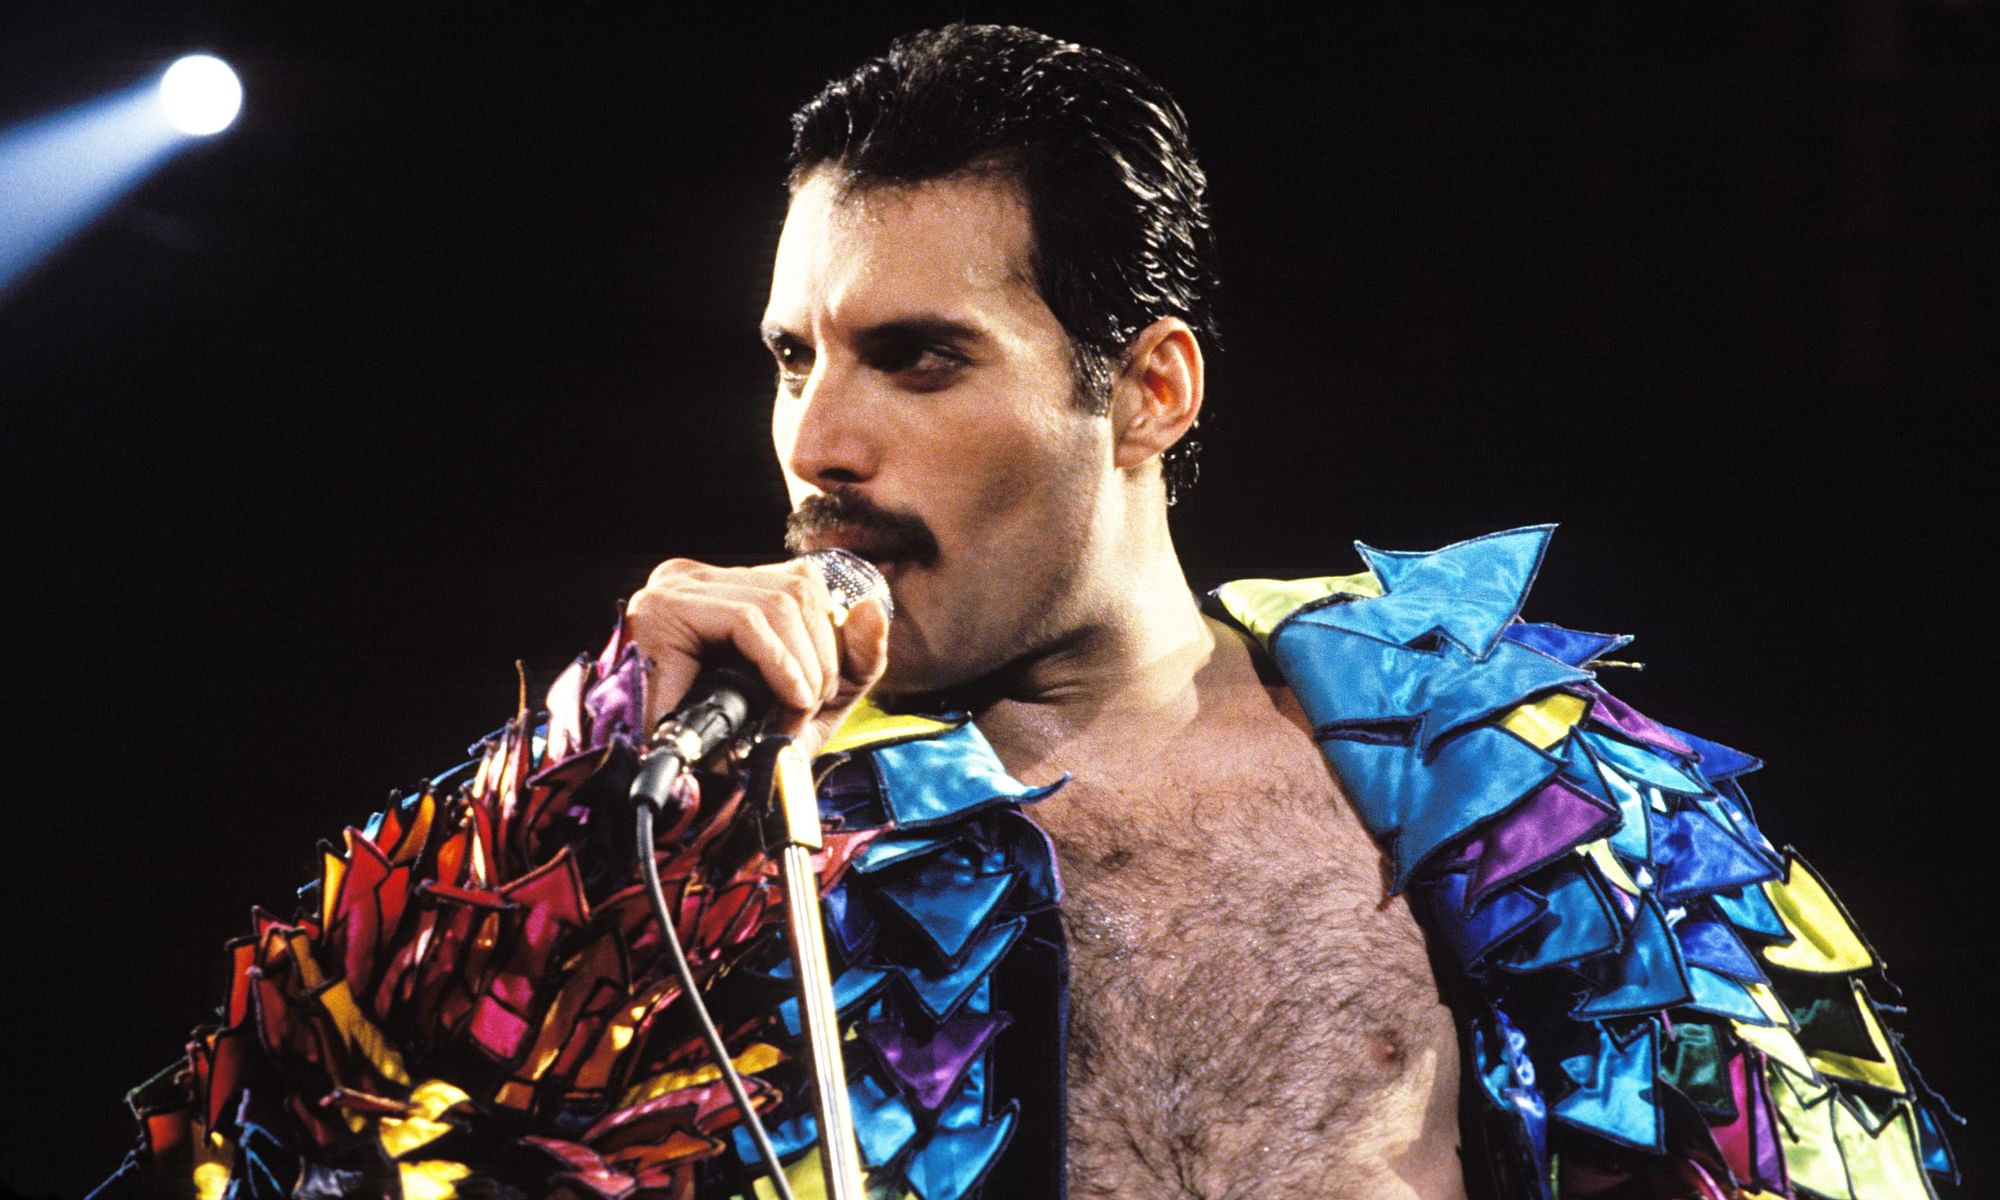 There is the tragic history of Freddie Mercury’s life that’s glaringly absent from this movie.